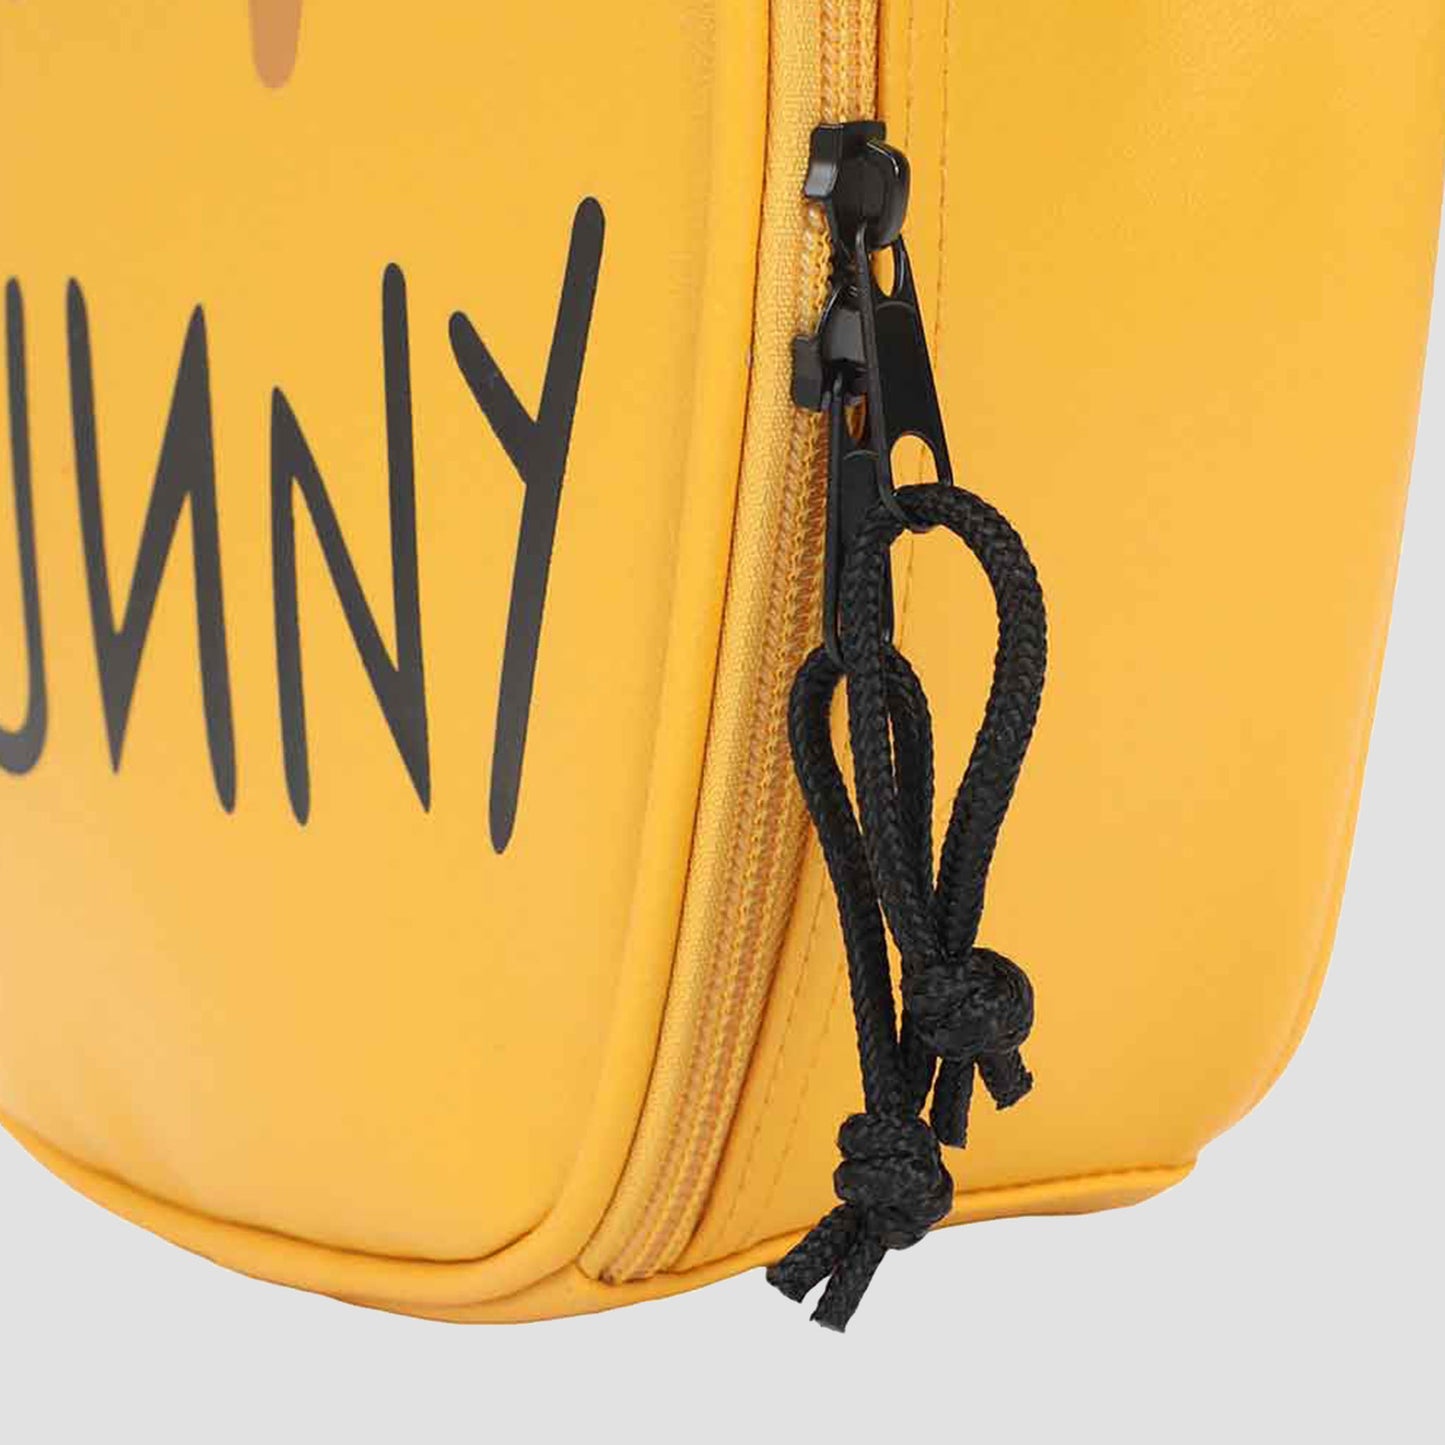 Hunny Pot (Winnie the Pooh) Disney Insulated Lunch Tote Bag